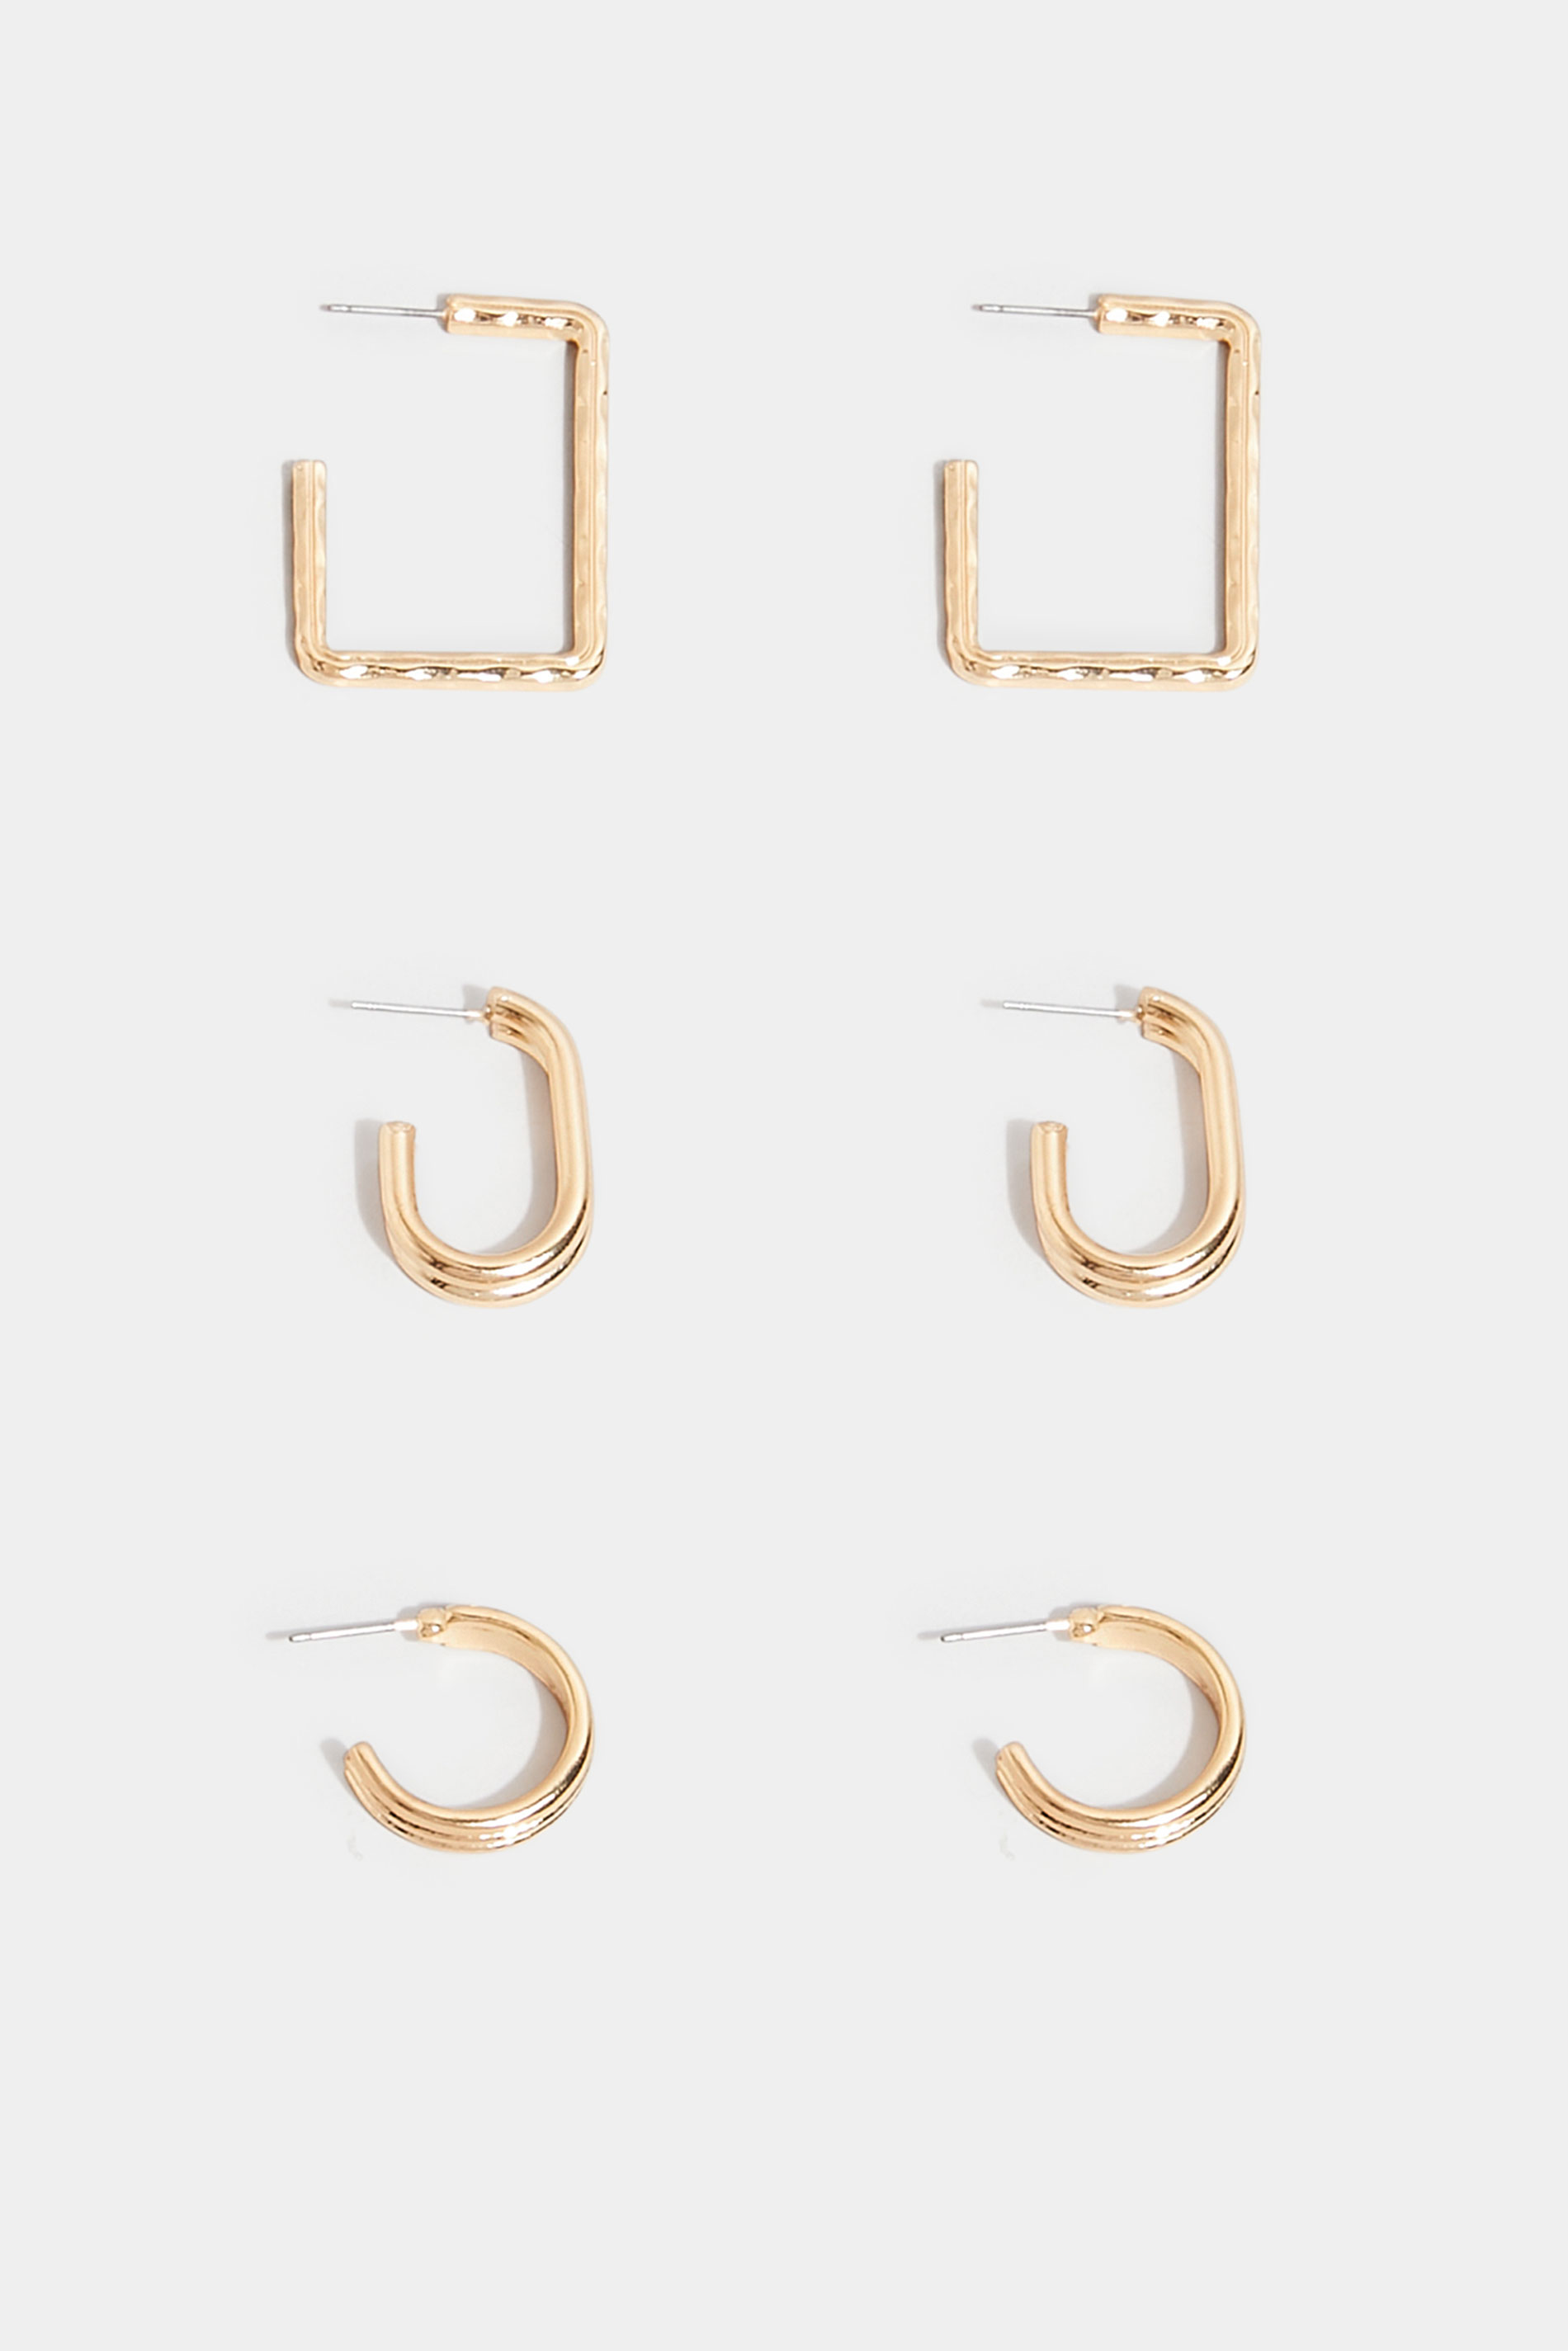 3 PACK  Gold Tone Textured Geometric Hoop Earrings | Yours Clothing 3